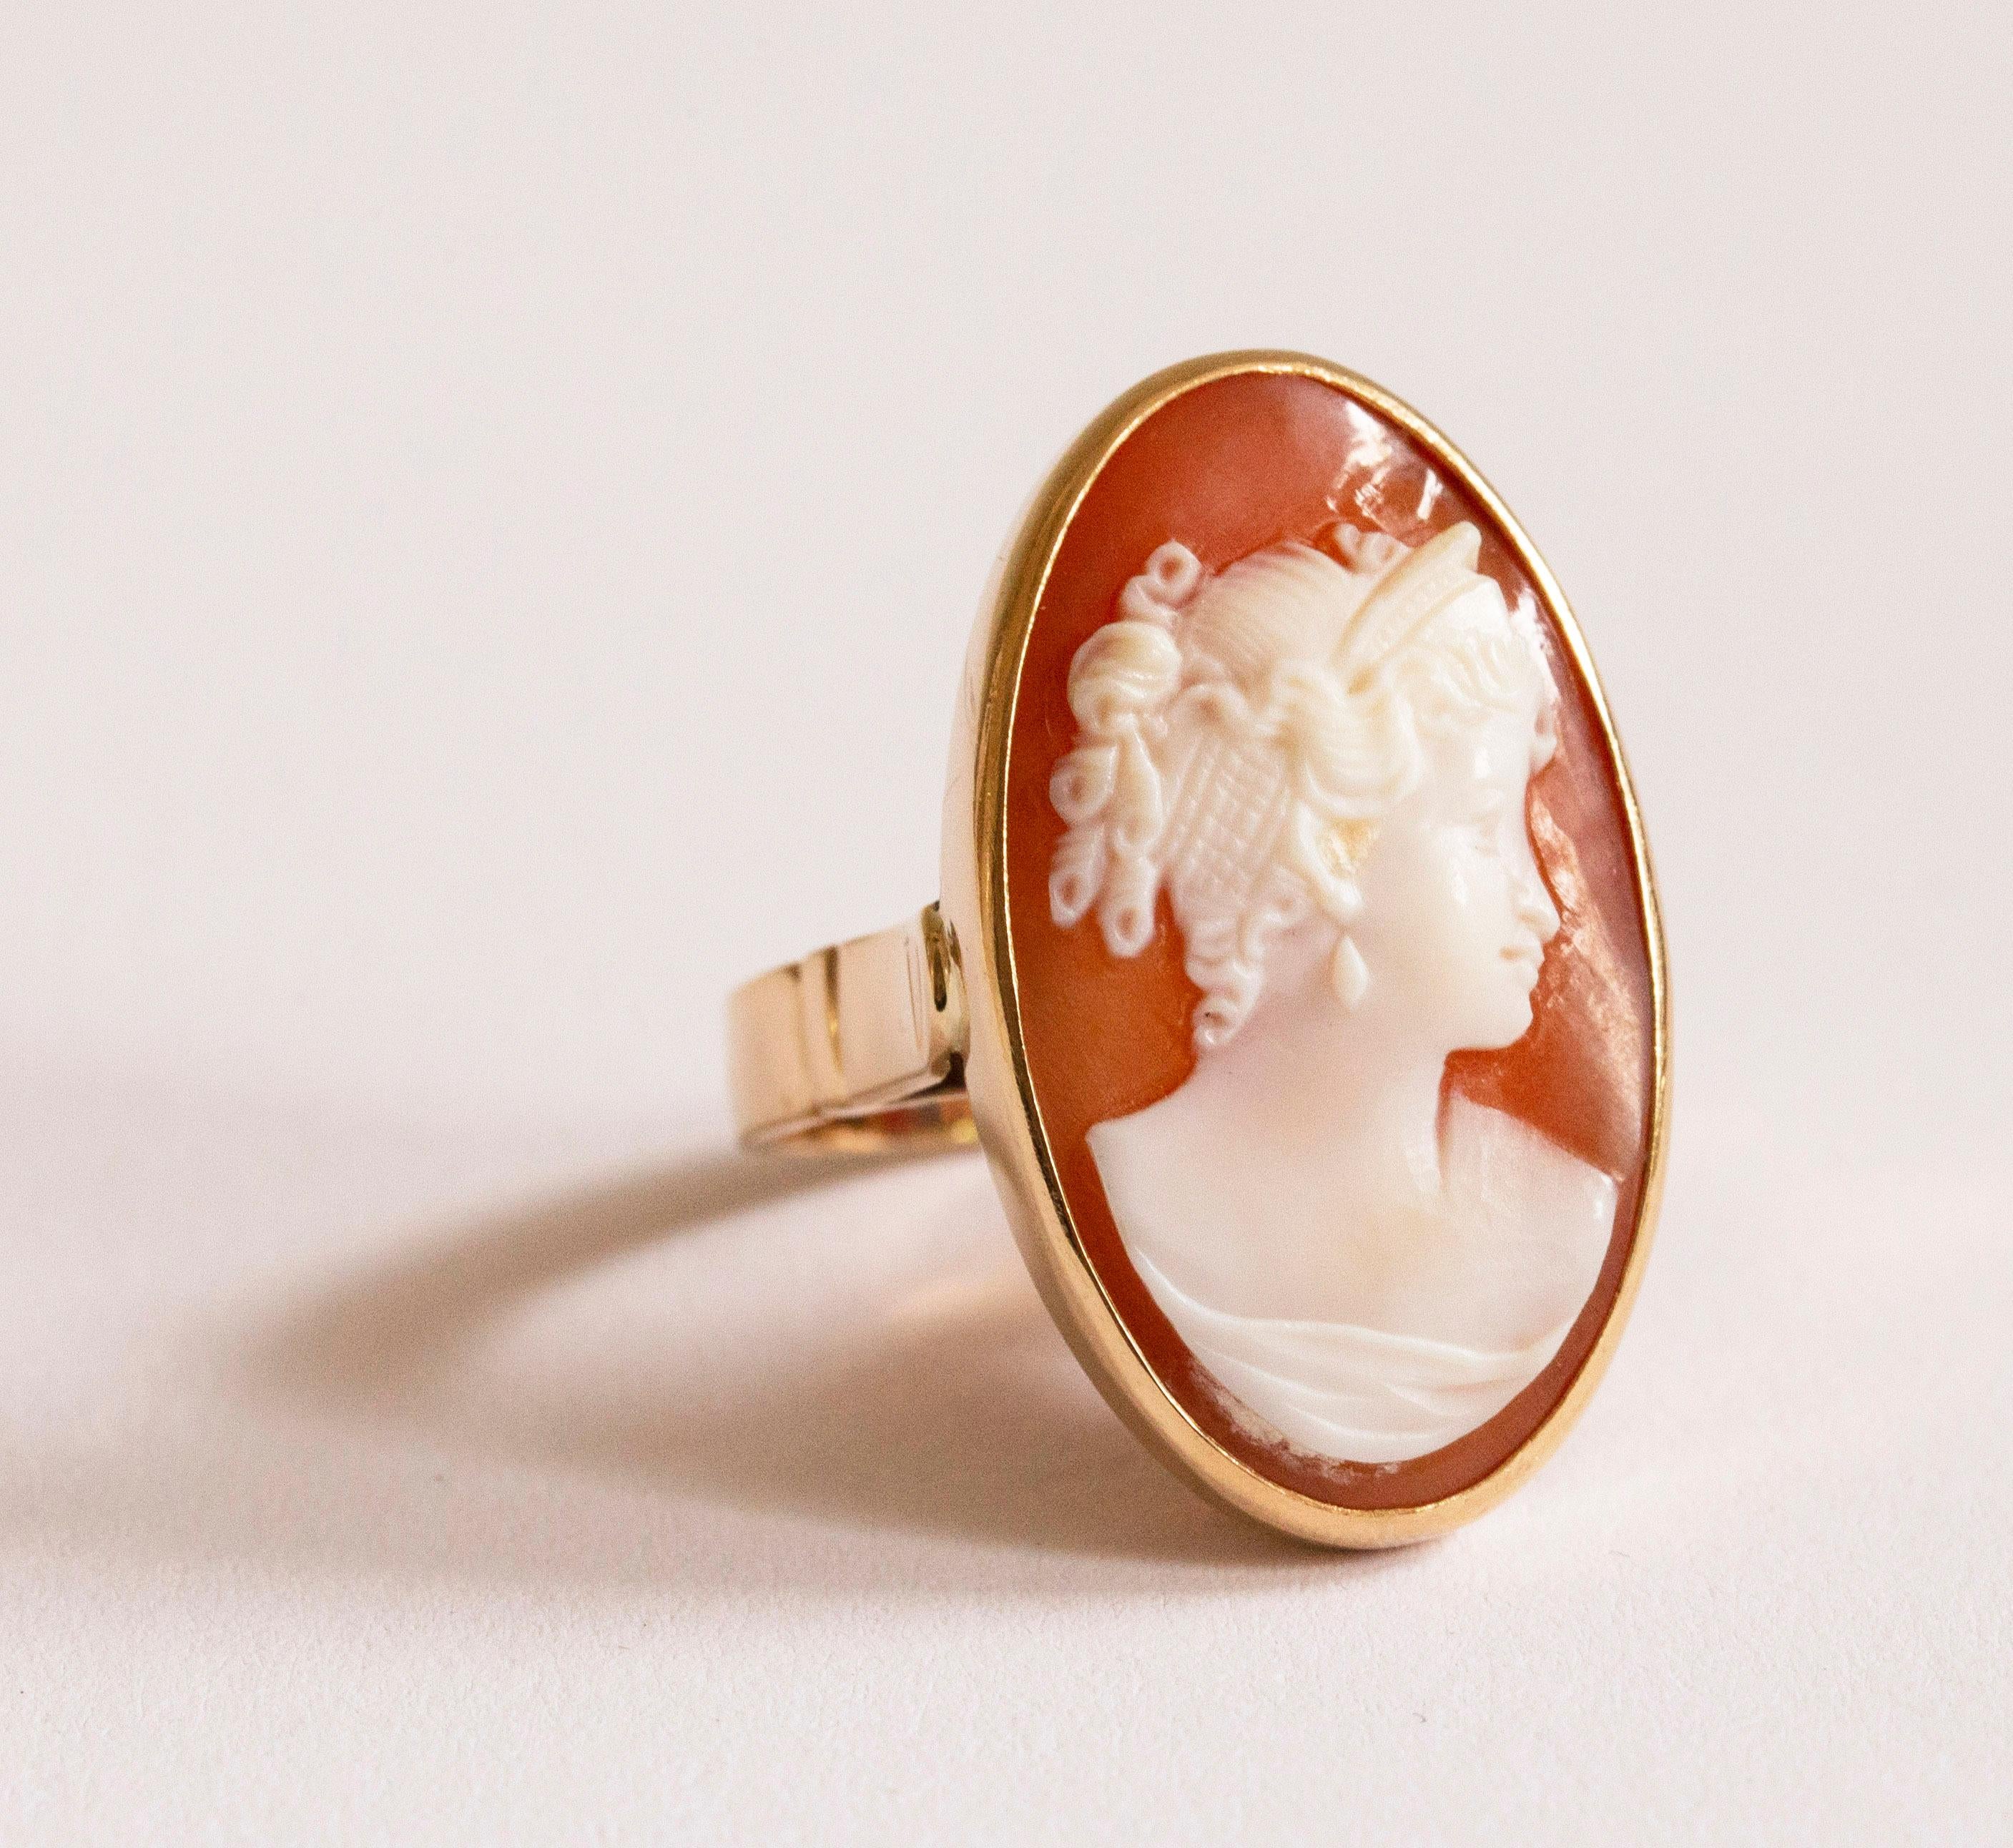 A vintage 14 K Yellow Gold ring with Cameo in an oval setting. The cameo features a female silhouette in the Victorian style. The ring is stamped with K14 that stands for the 14 karat gold content. The item was manufactured in the middle of the 20th